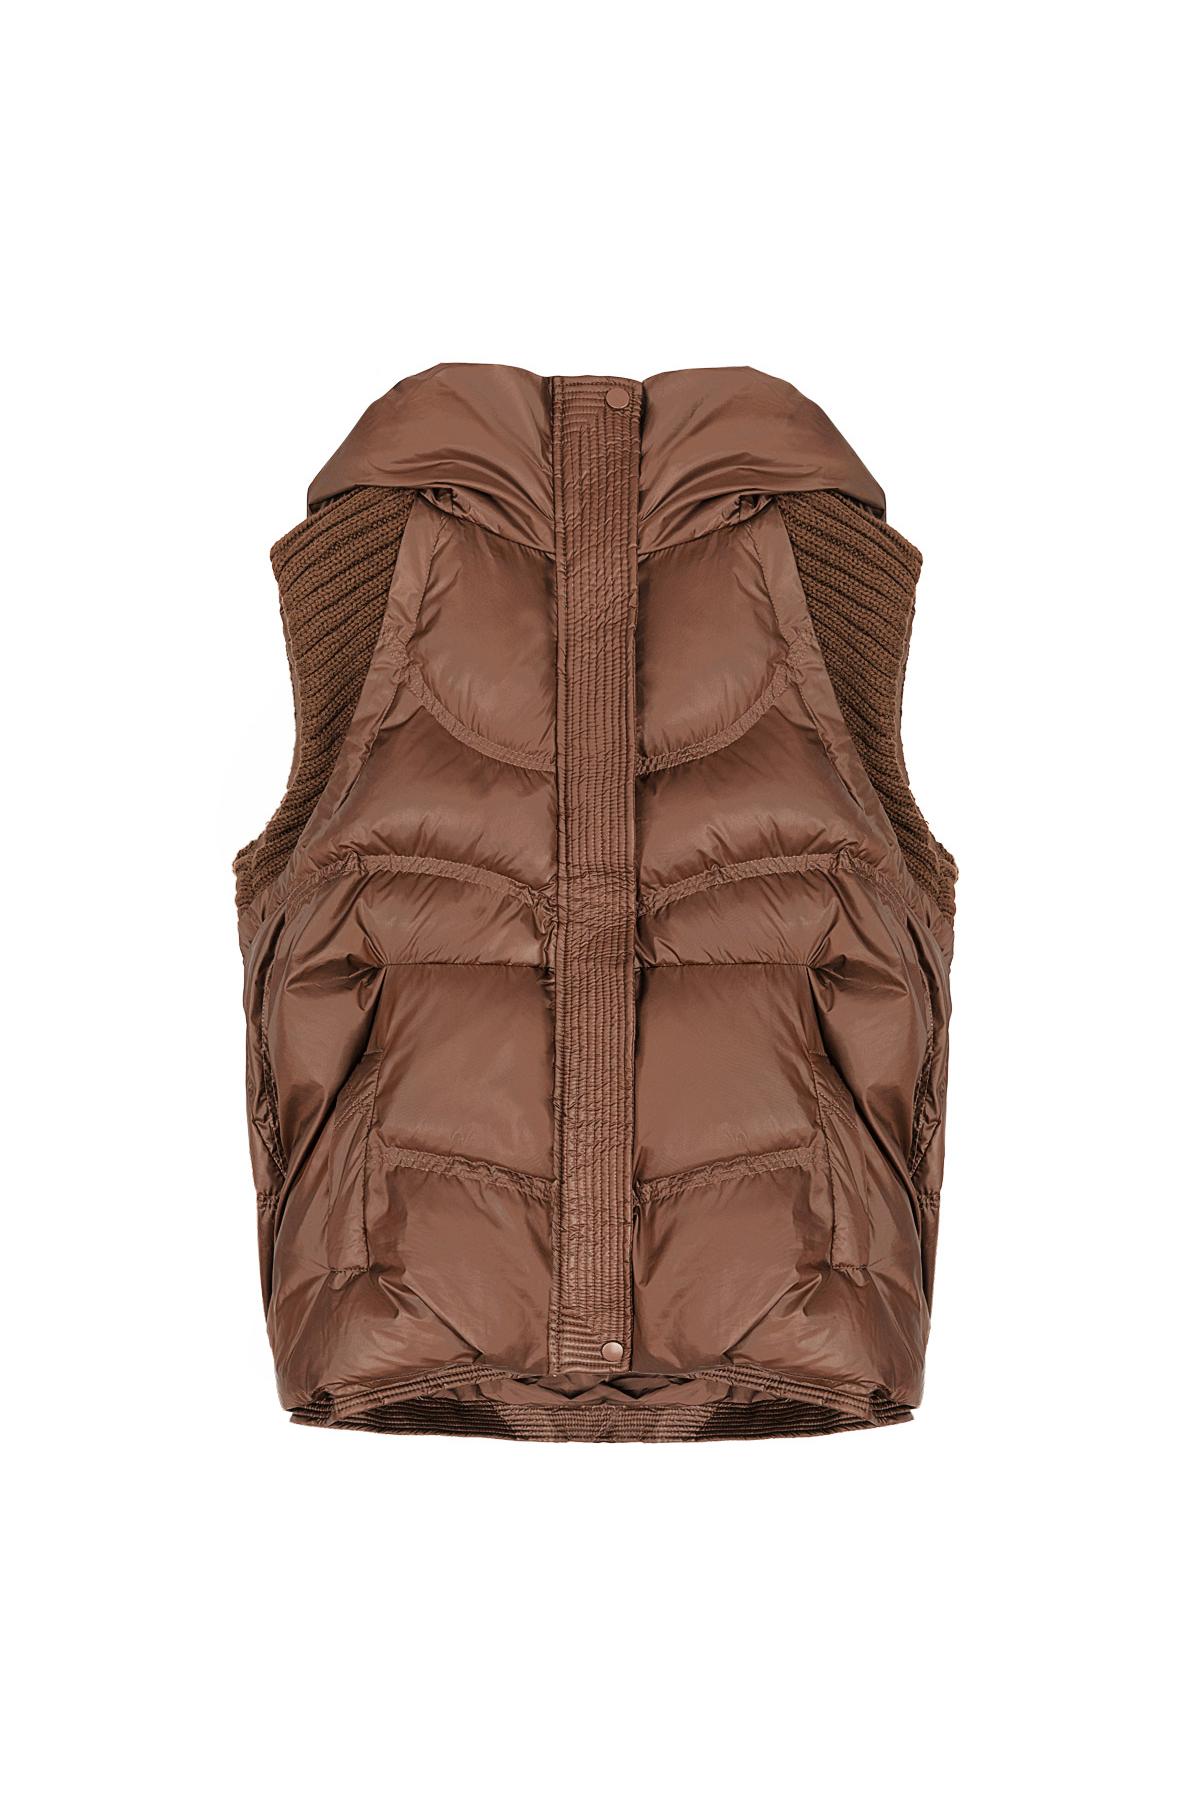 Body autunnale Brown S h5 